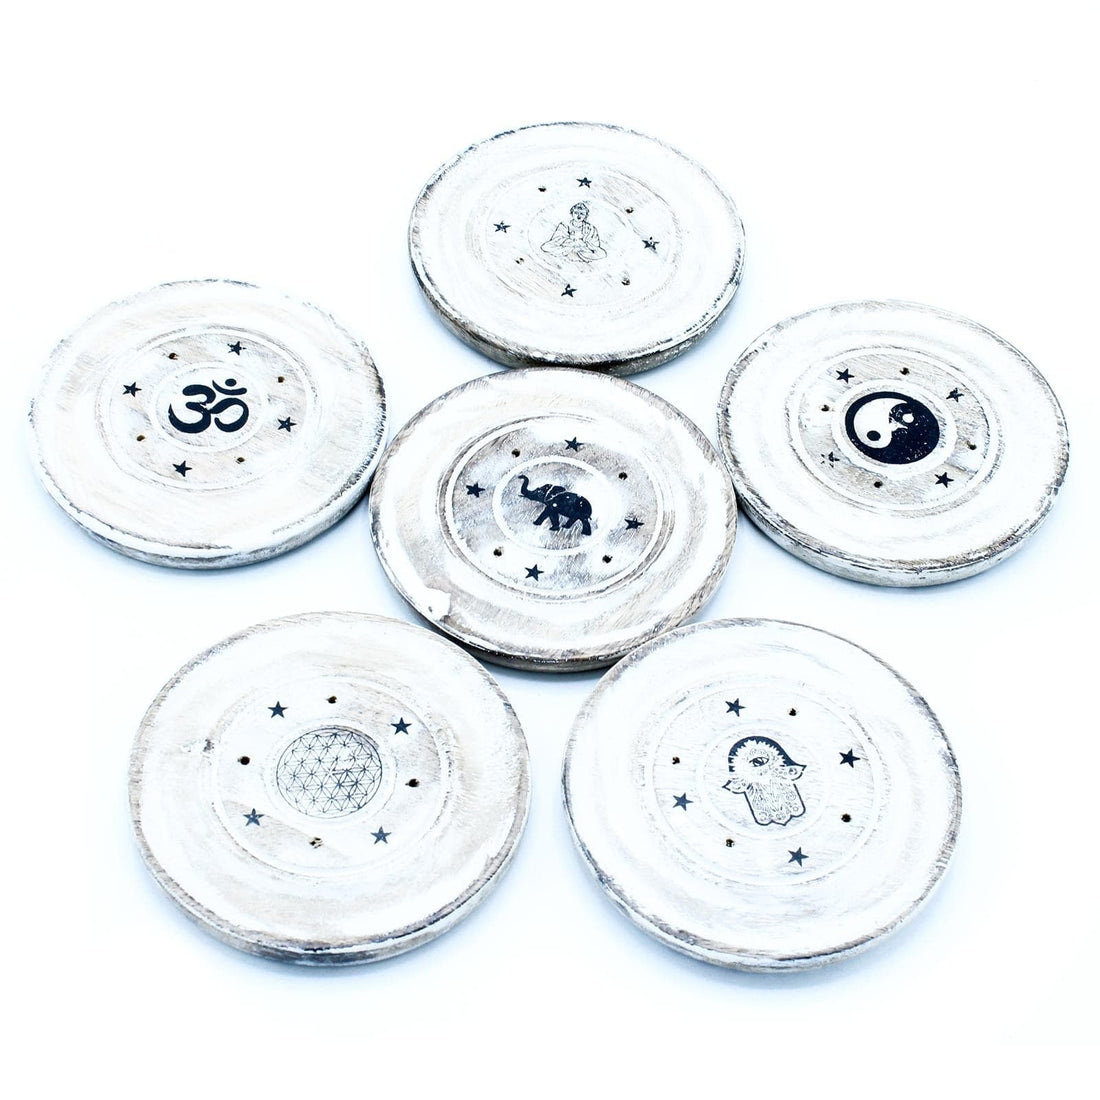 White Washed Incense Holder - Cone and Incense Disc - best price from Maltashopper.com WWIH-02